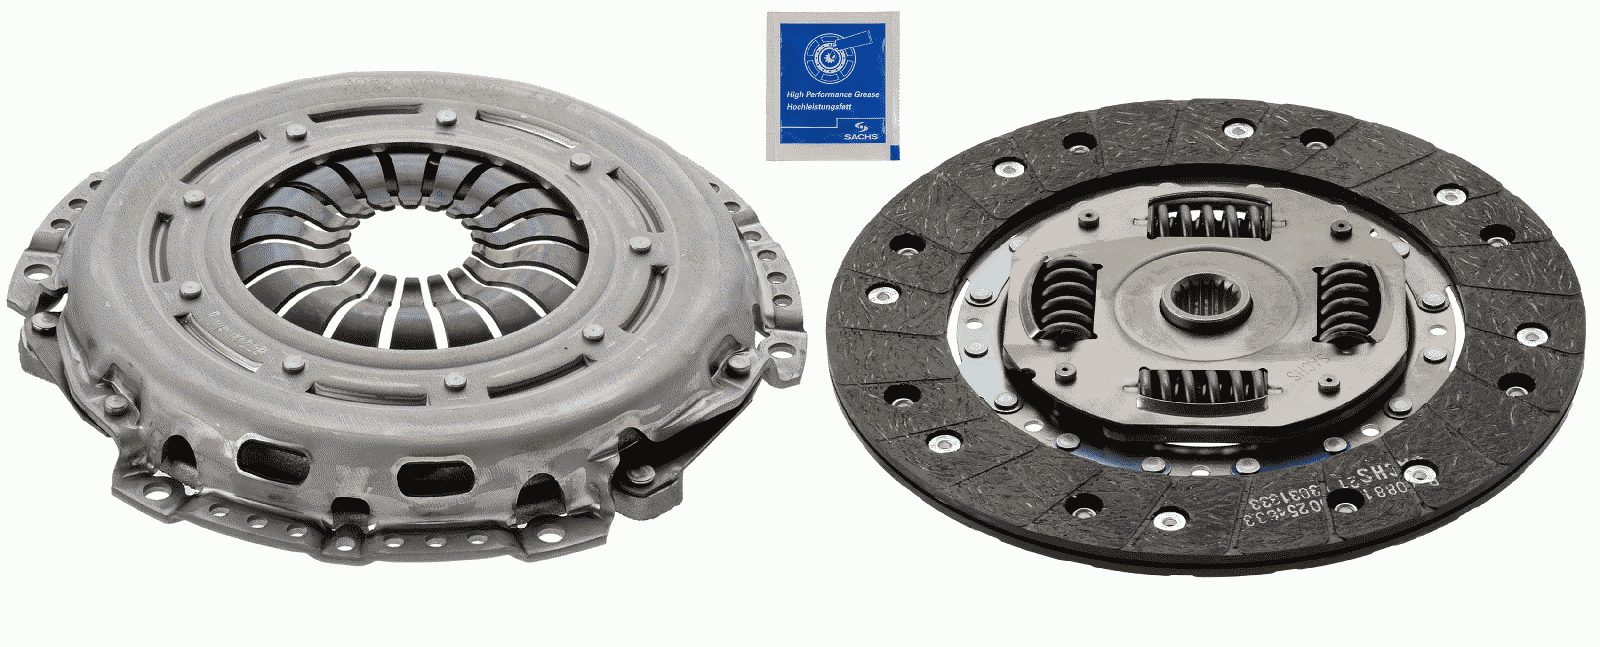 Sachs Clutch Kit 2 piece (Cover+Plate) 3000950068 [PM834893]